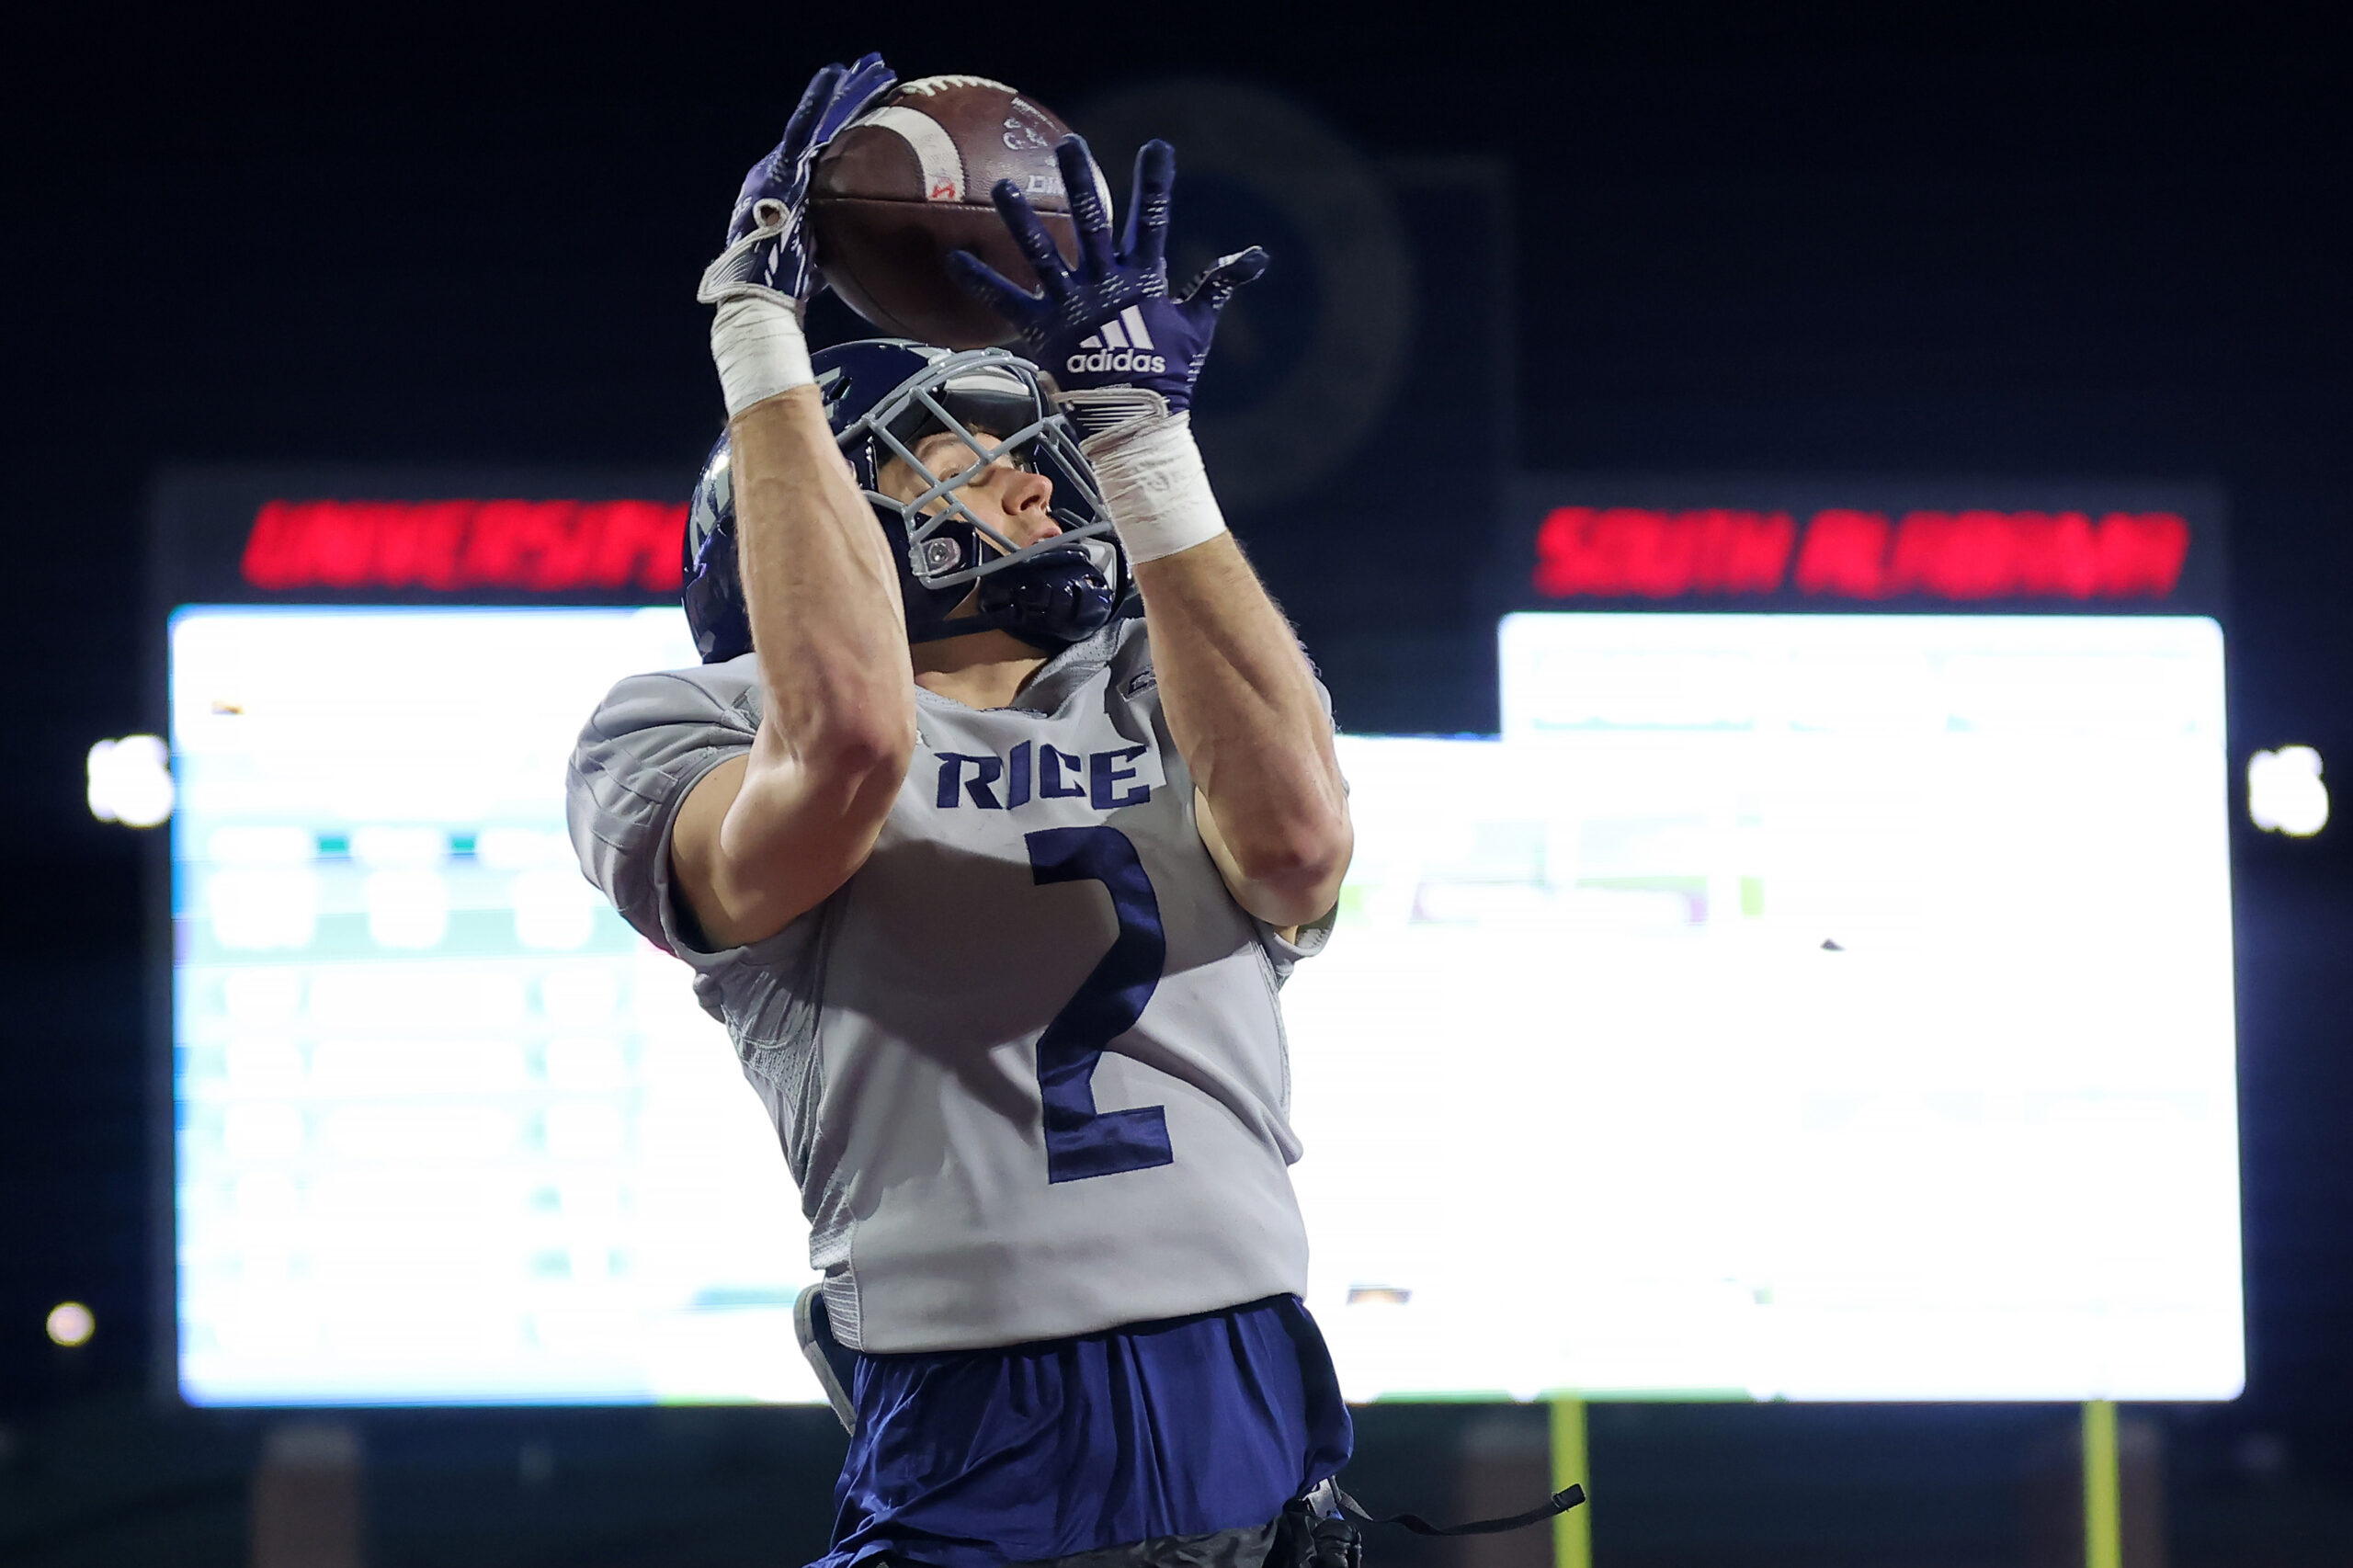 MOBILE, ALABAMA - DECEMBER 17: Bradley Rozner #2 of the Rice Owls catches the ball for a touchdown during the second half of the LendingTree Bowl against the Southern Miss Golden Eagles at Hancock Whitney Stadium on December 17, 2022 in Mobile, Alabama. (Photo by Jonathan Bachman/Getty Images)